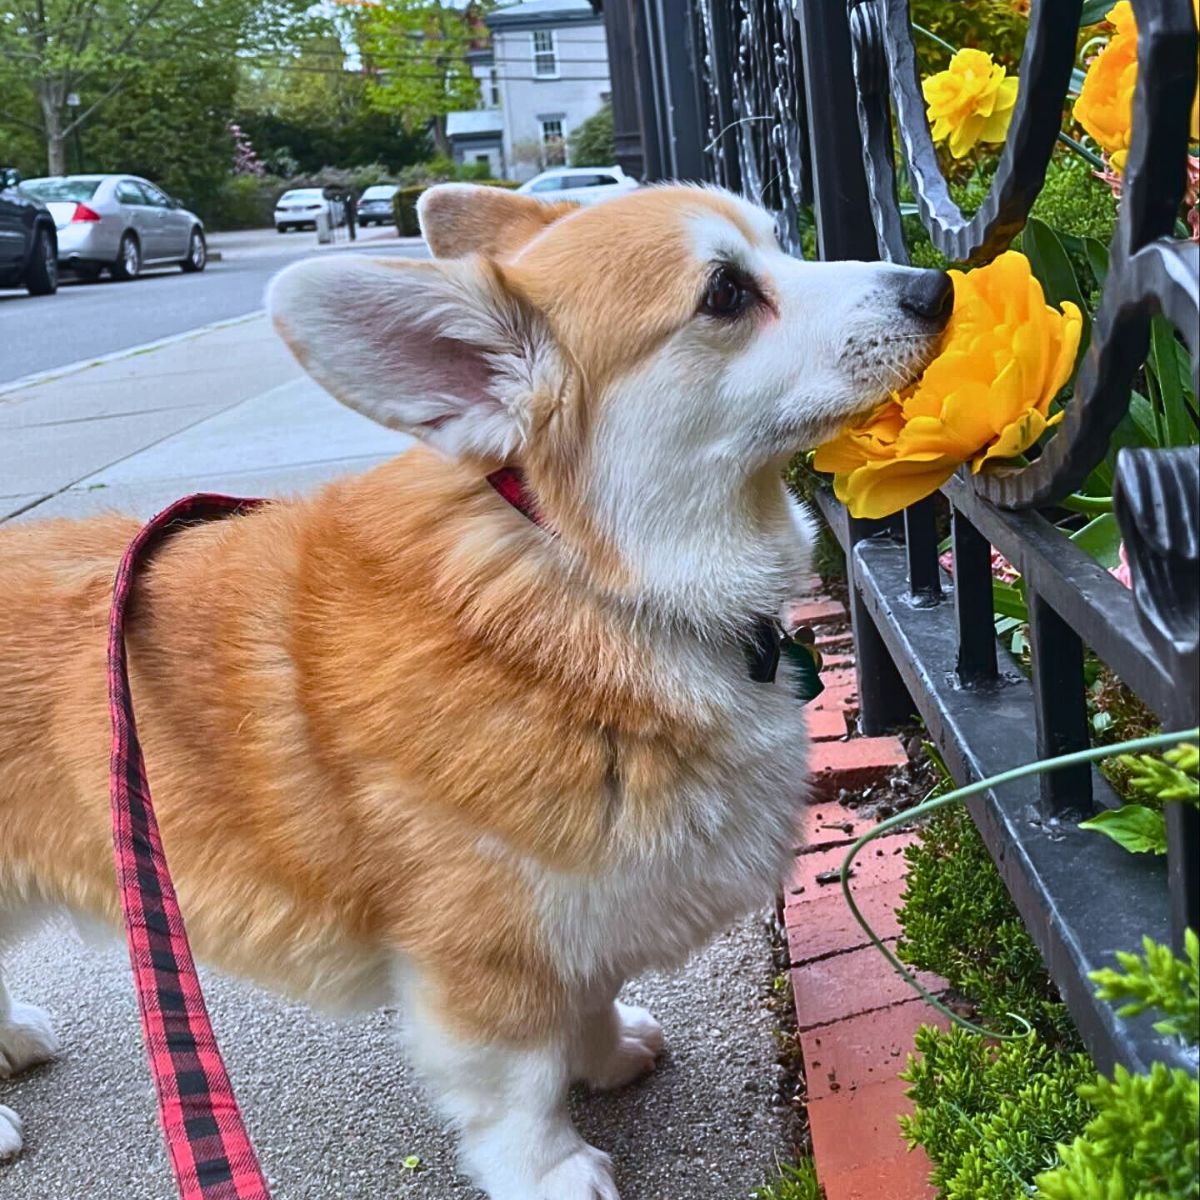 What Makes Flowers Smell?